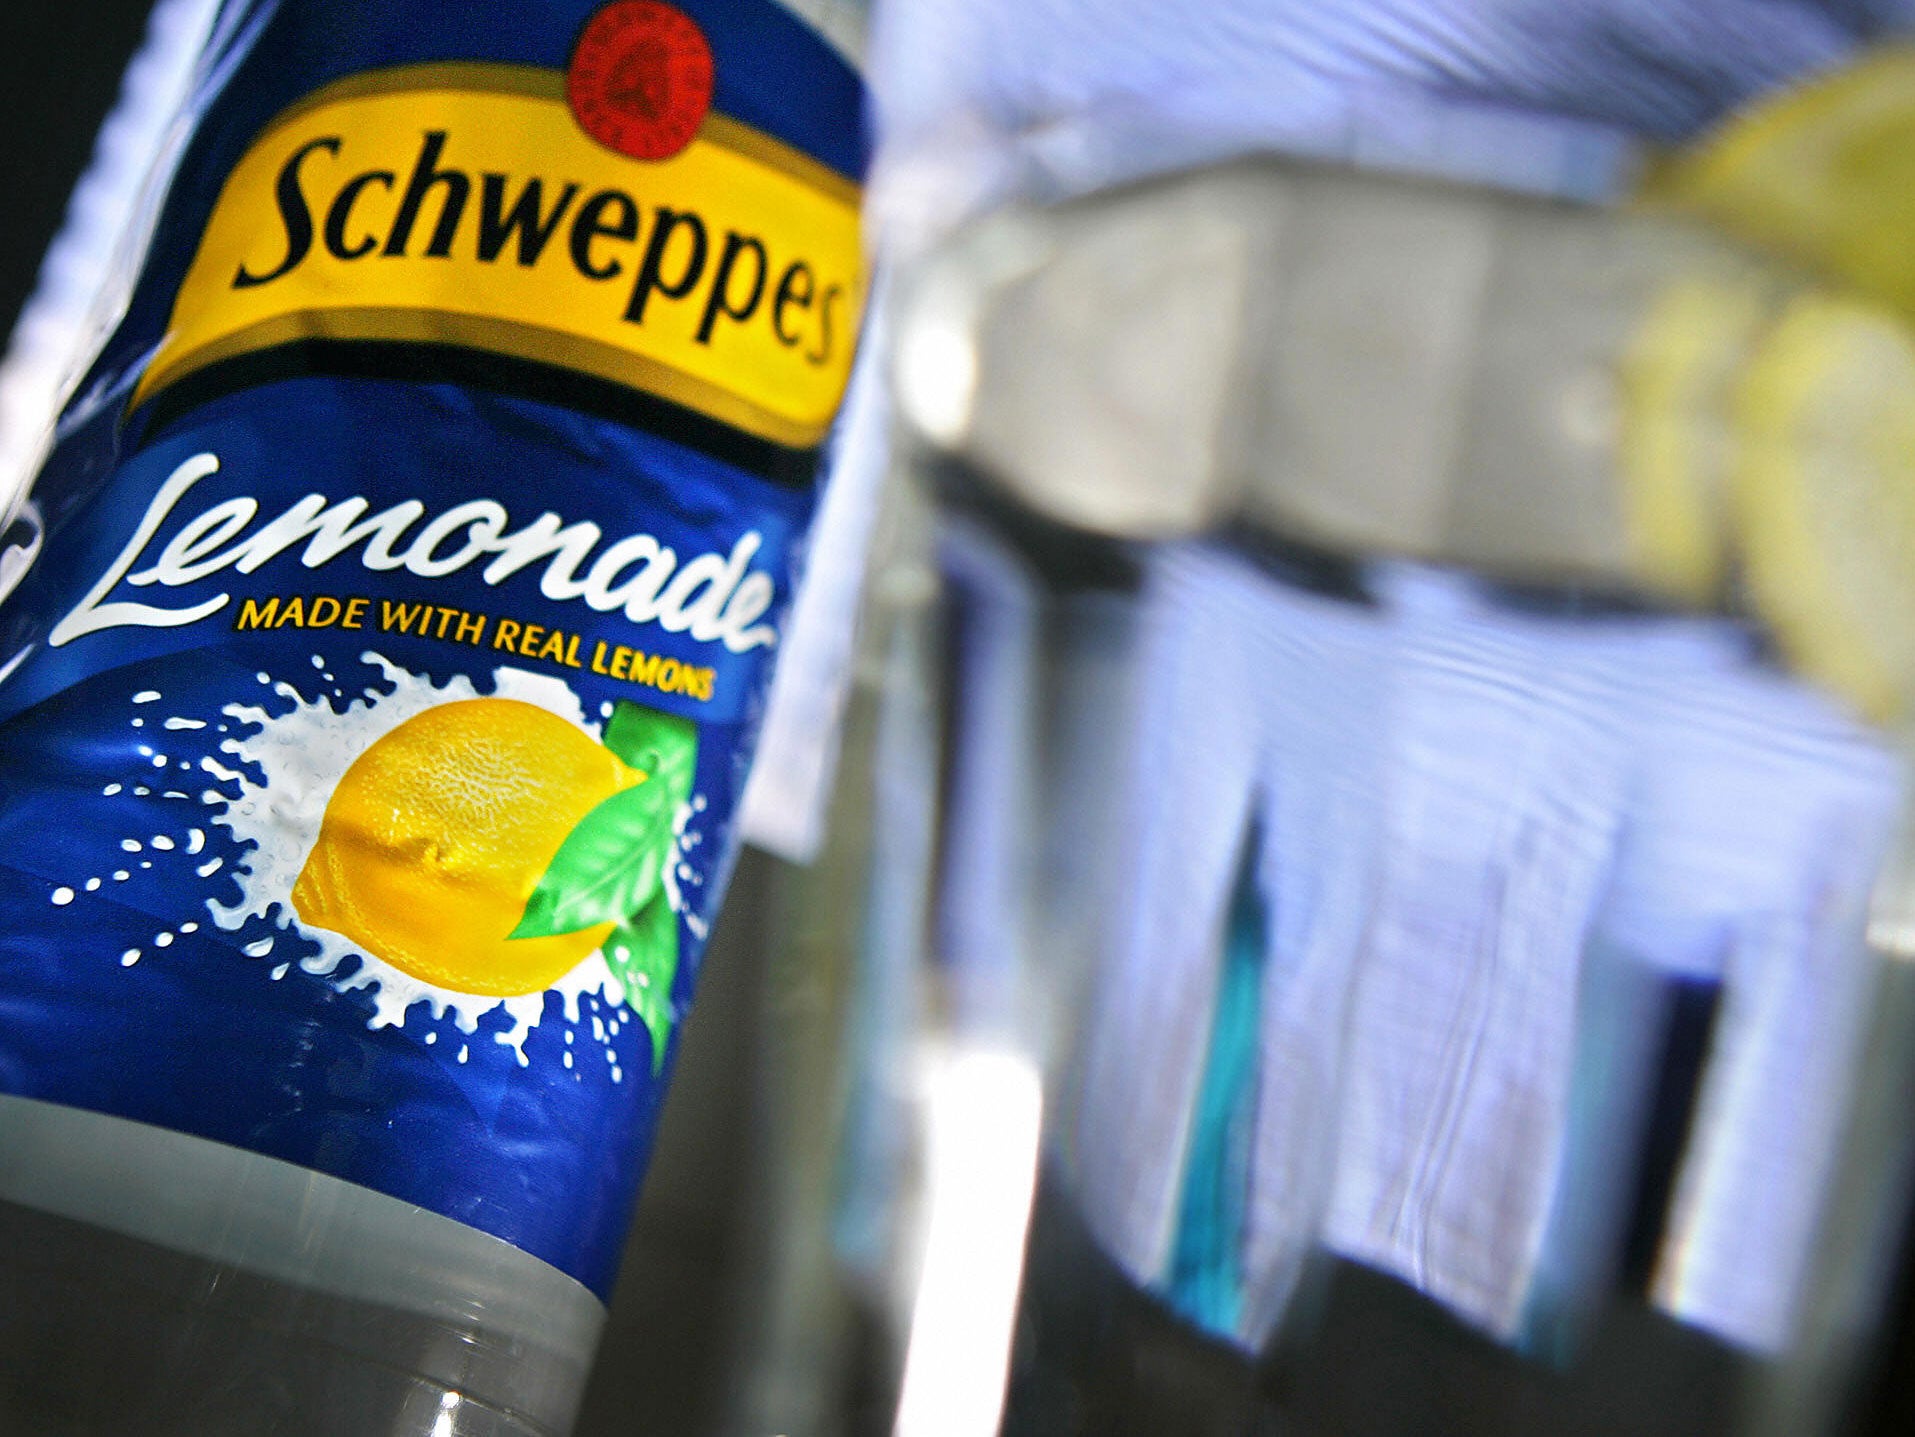 Tesco has pulled 25 lines of Schweppes from its shelves, including tonic water and ginger ale.